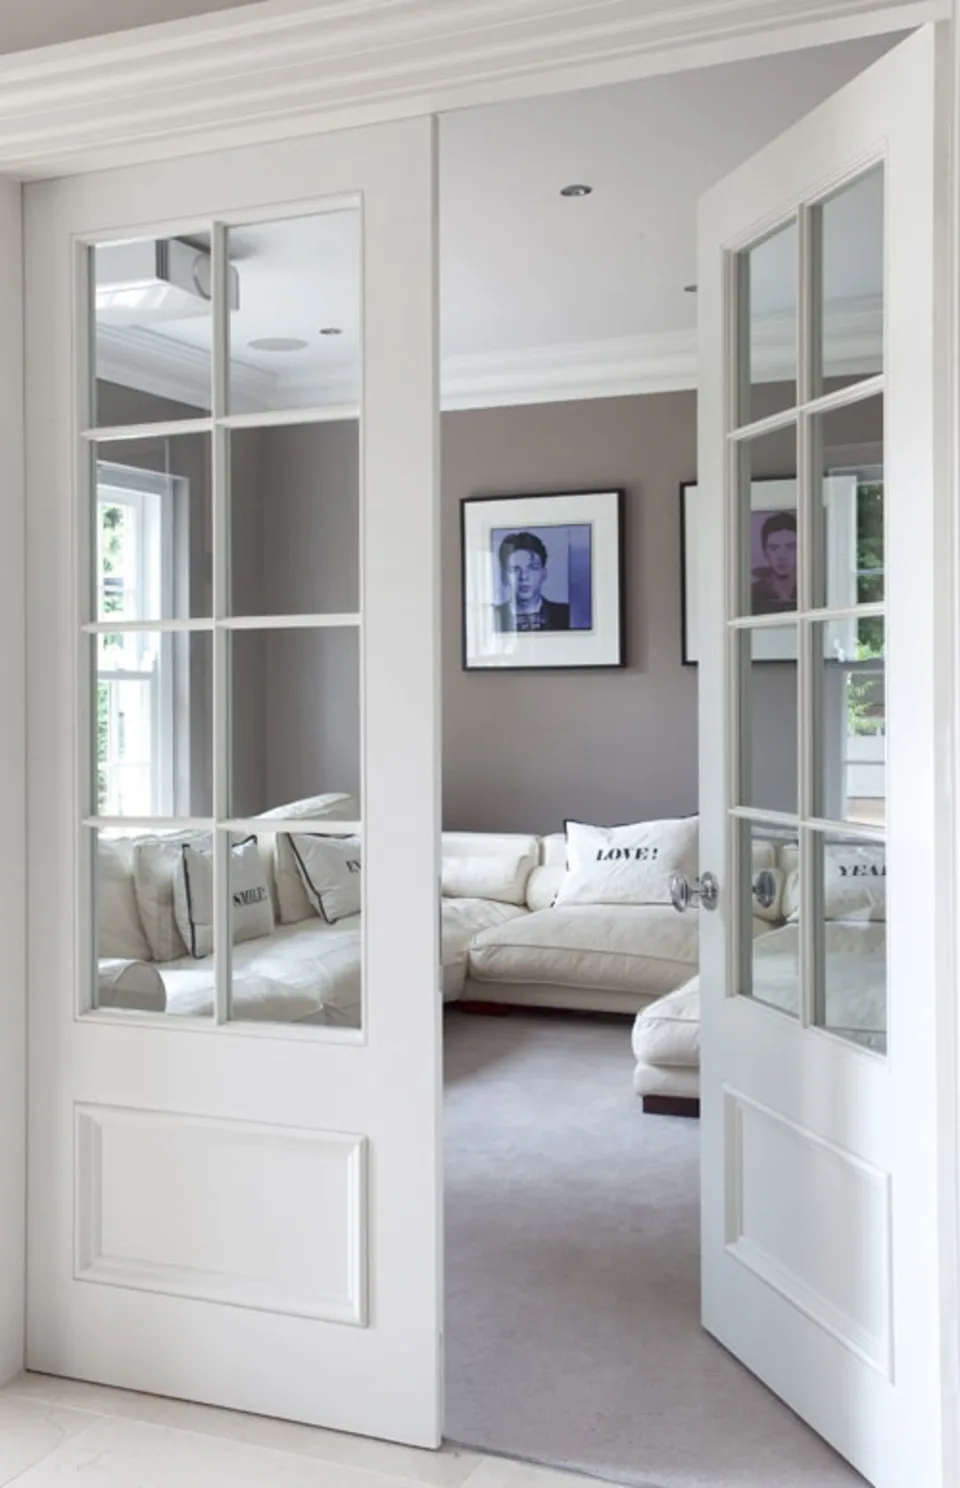 The Timeless Elegance of French Doors: A
Complete Guide